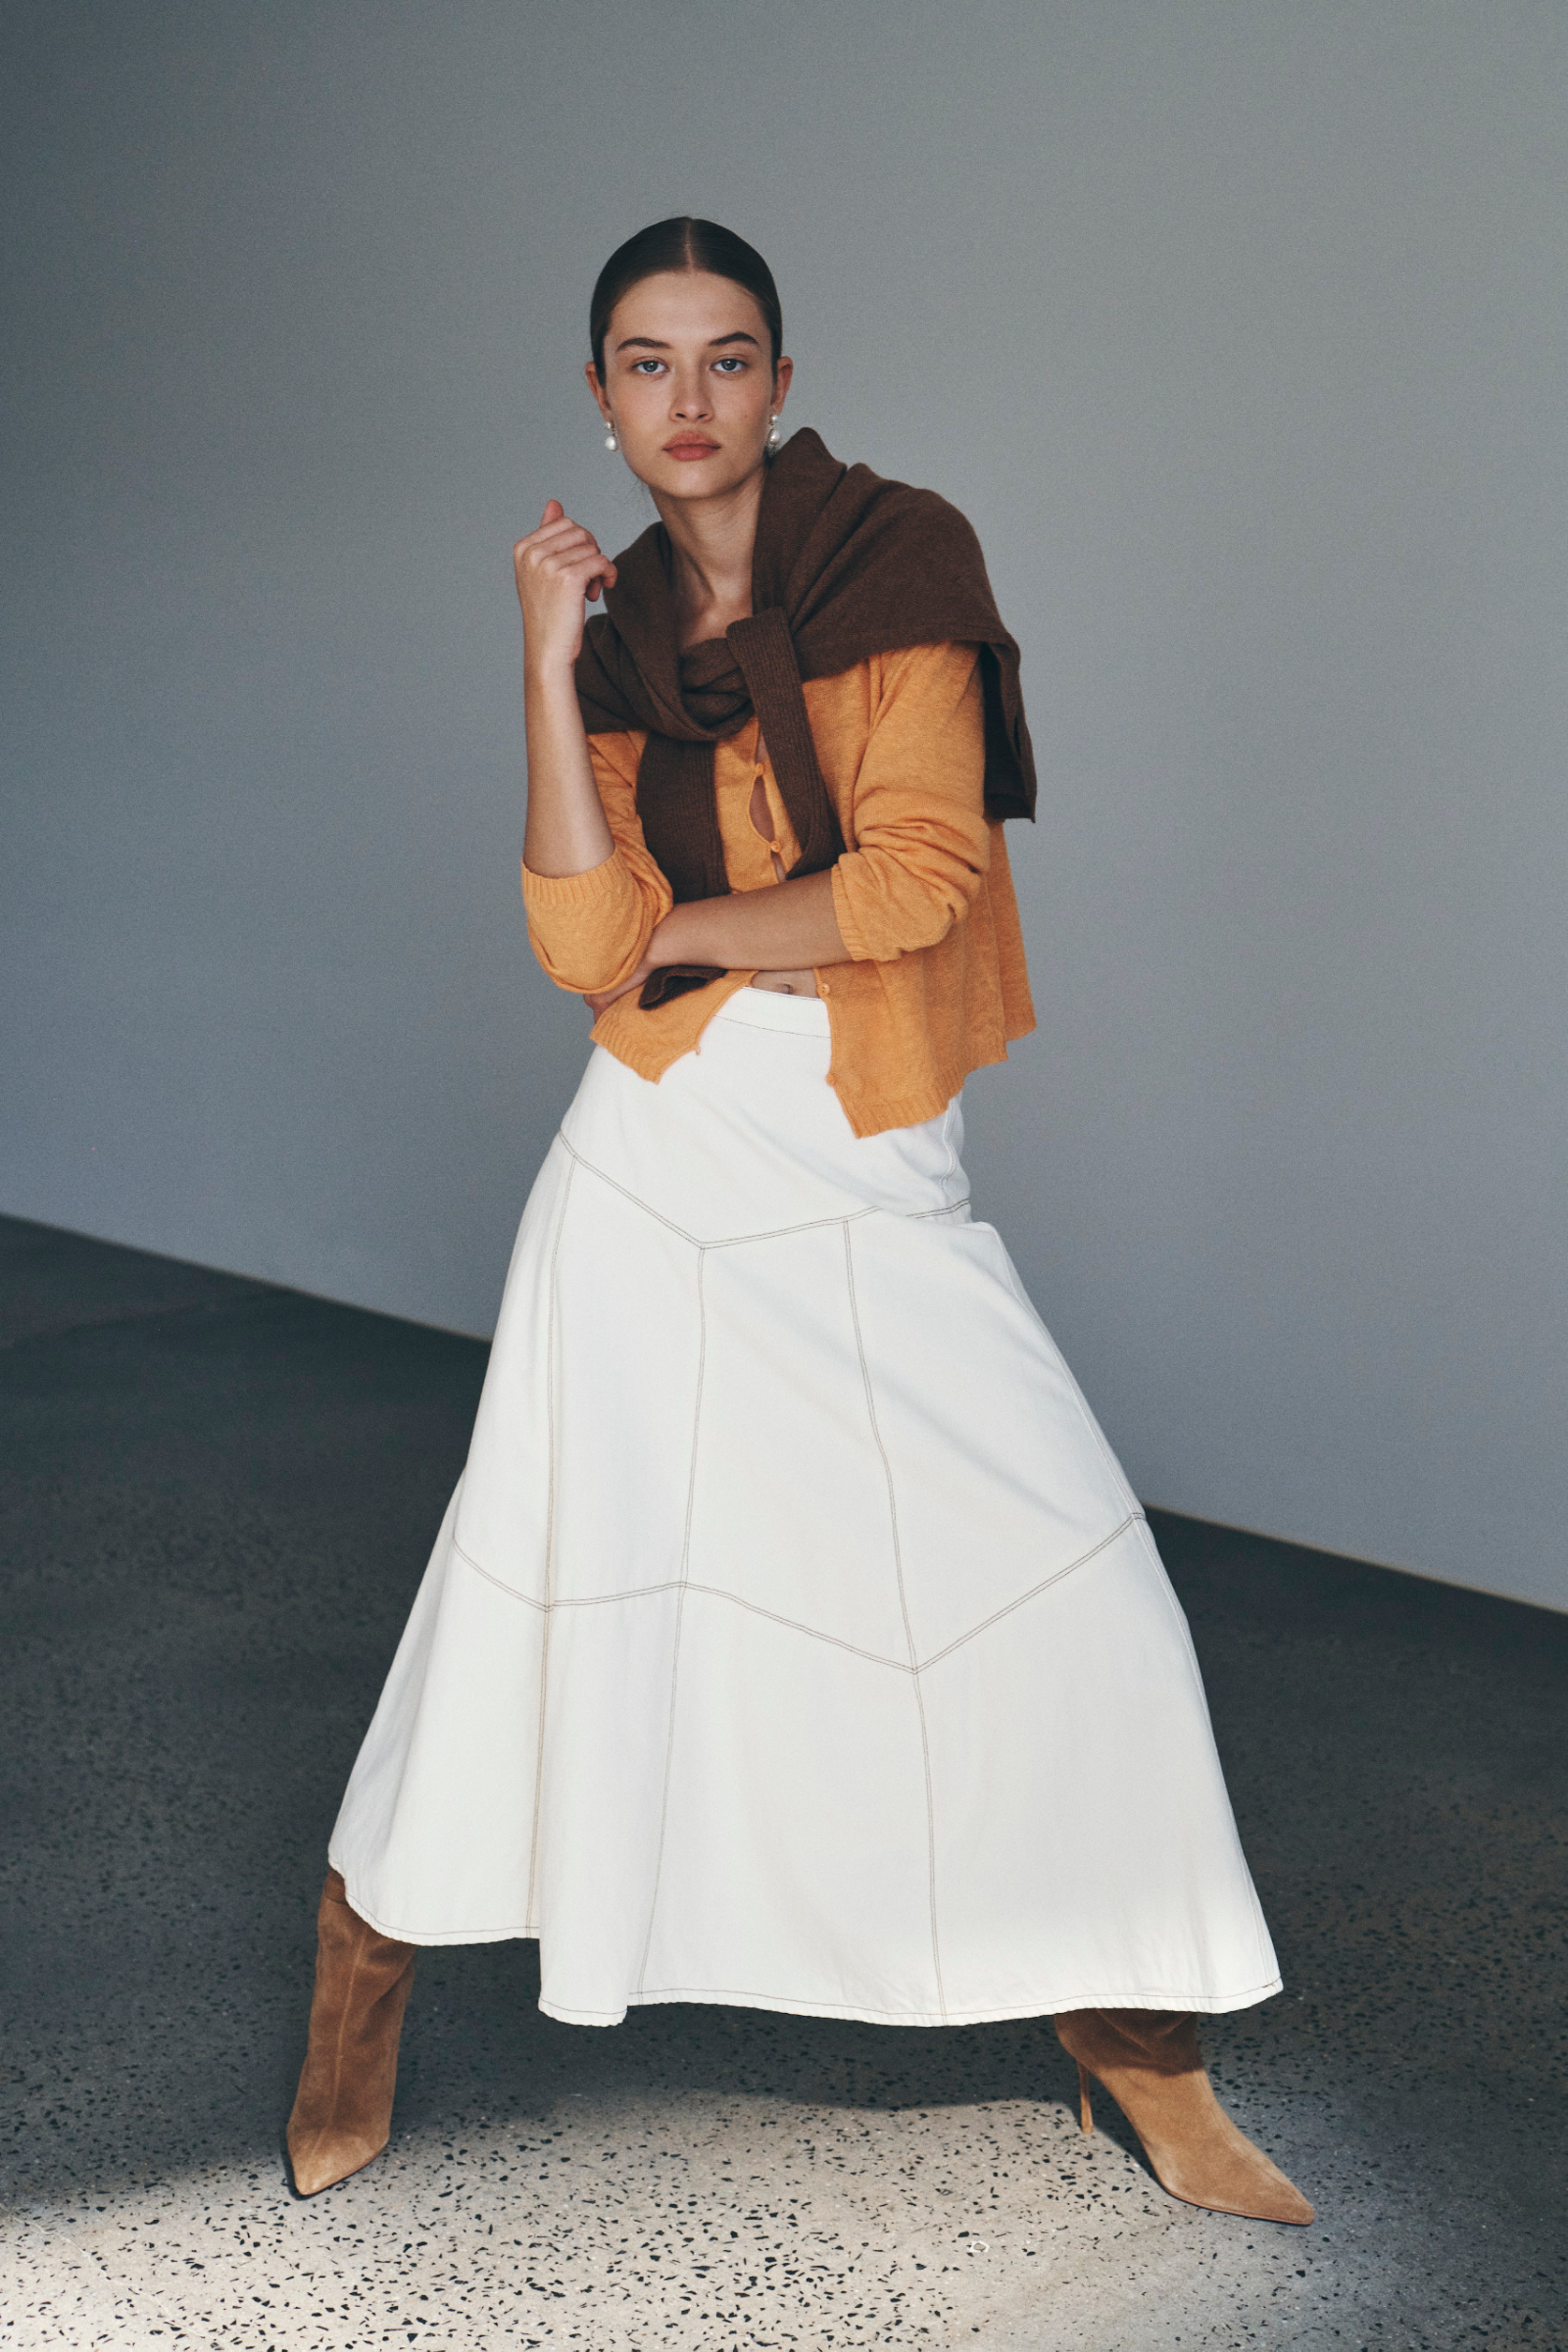 Bianca wears the Marcia Knit Long Sleeve Top and Paloma Midi Skirt with an Enzo Merino Knit Jumper tied around her shoulders. She accessorises with pearl drop earrings, brown suede knee-high boots, and completes the look with a low, slick bun. 